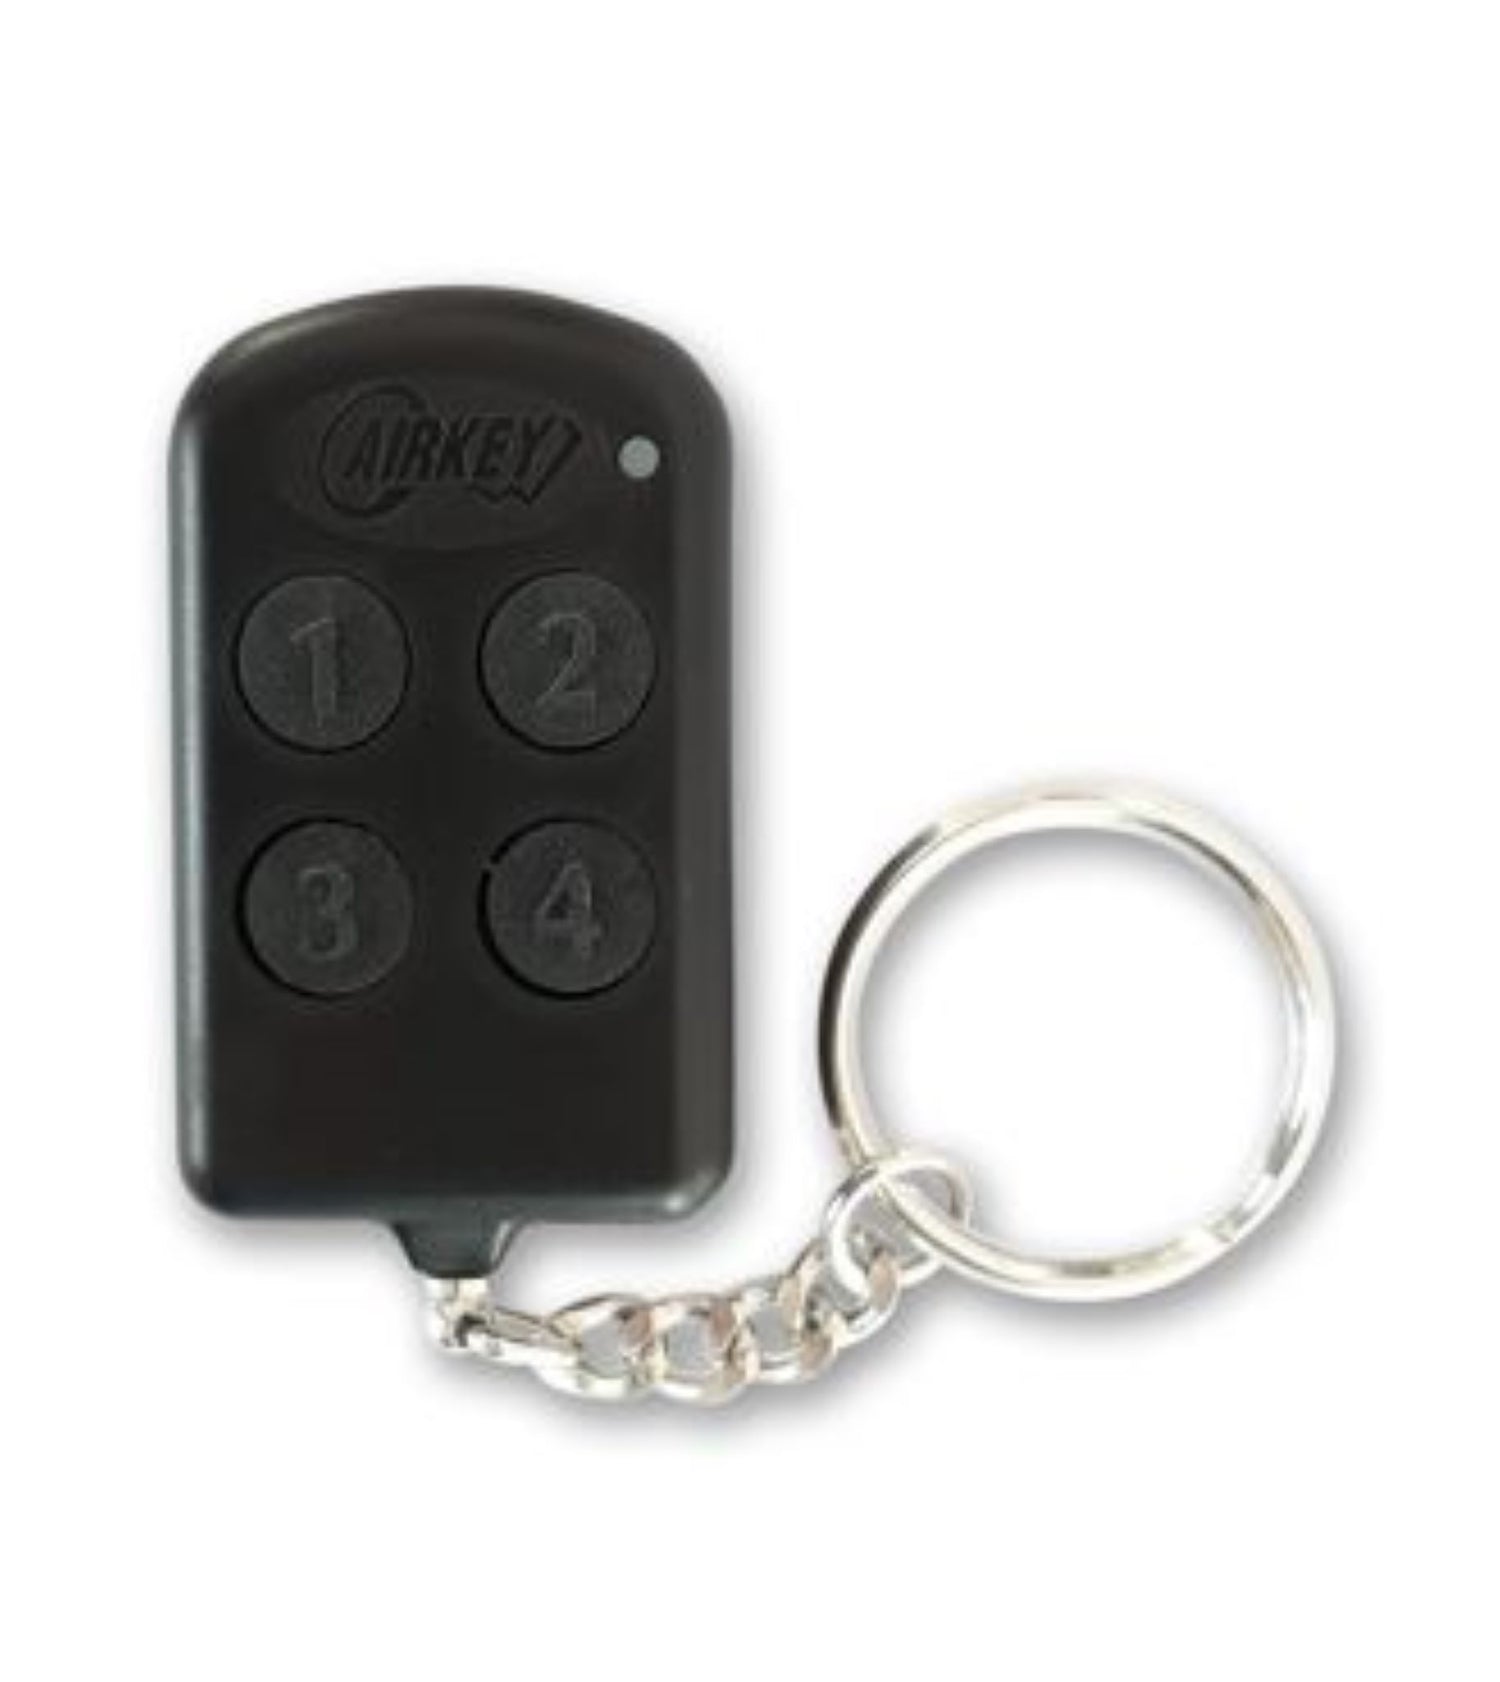 Airkey Any Application Remotes